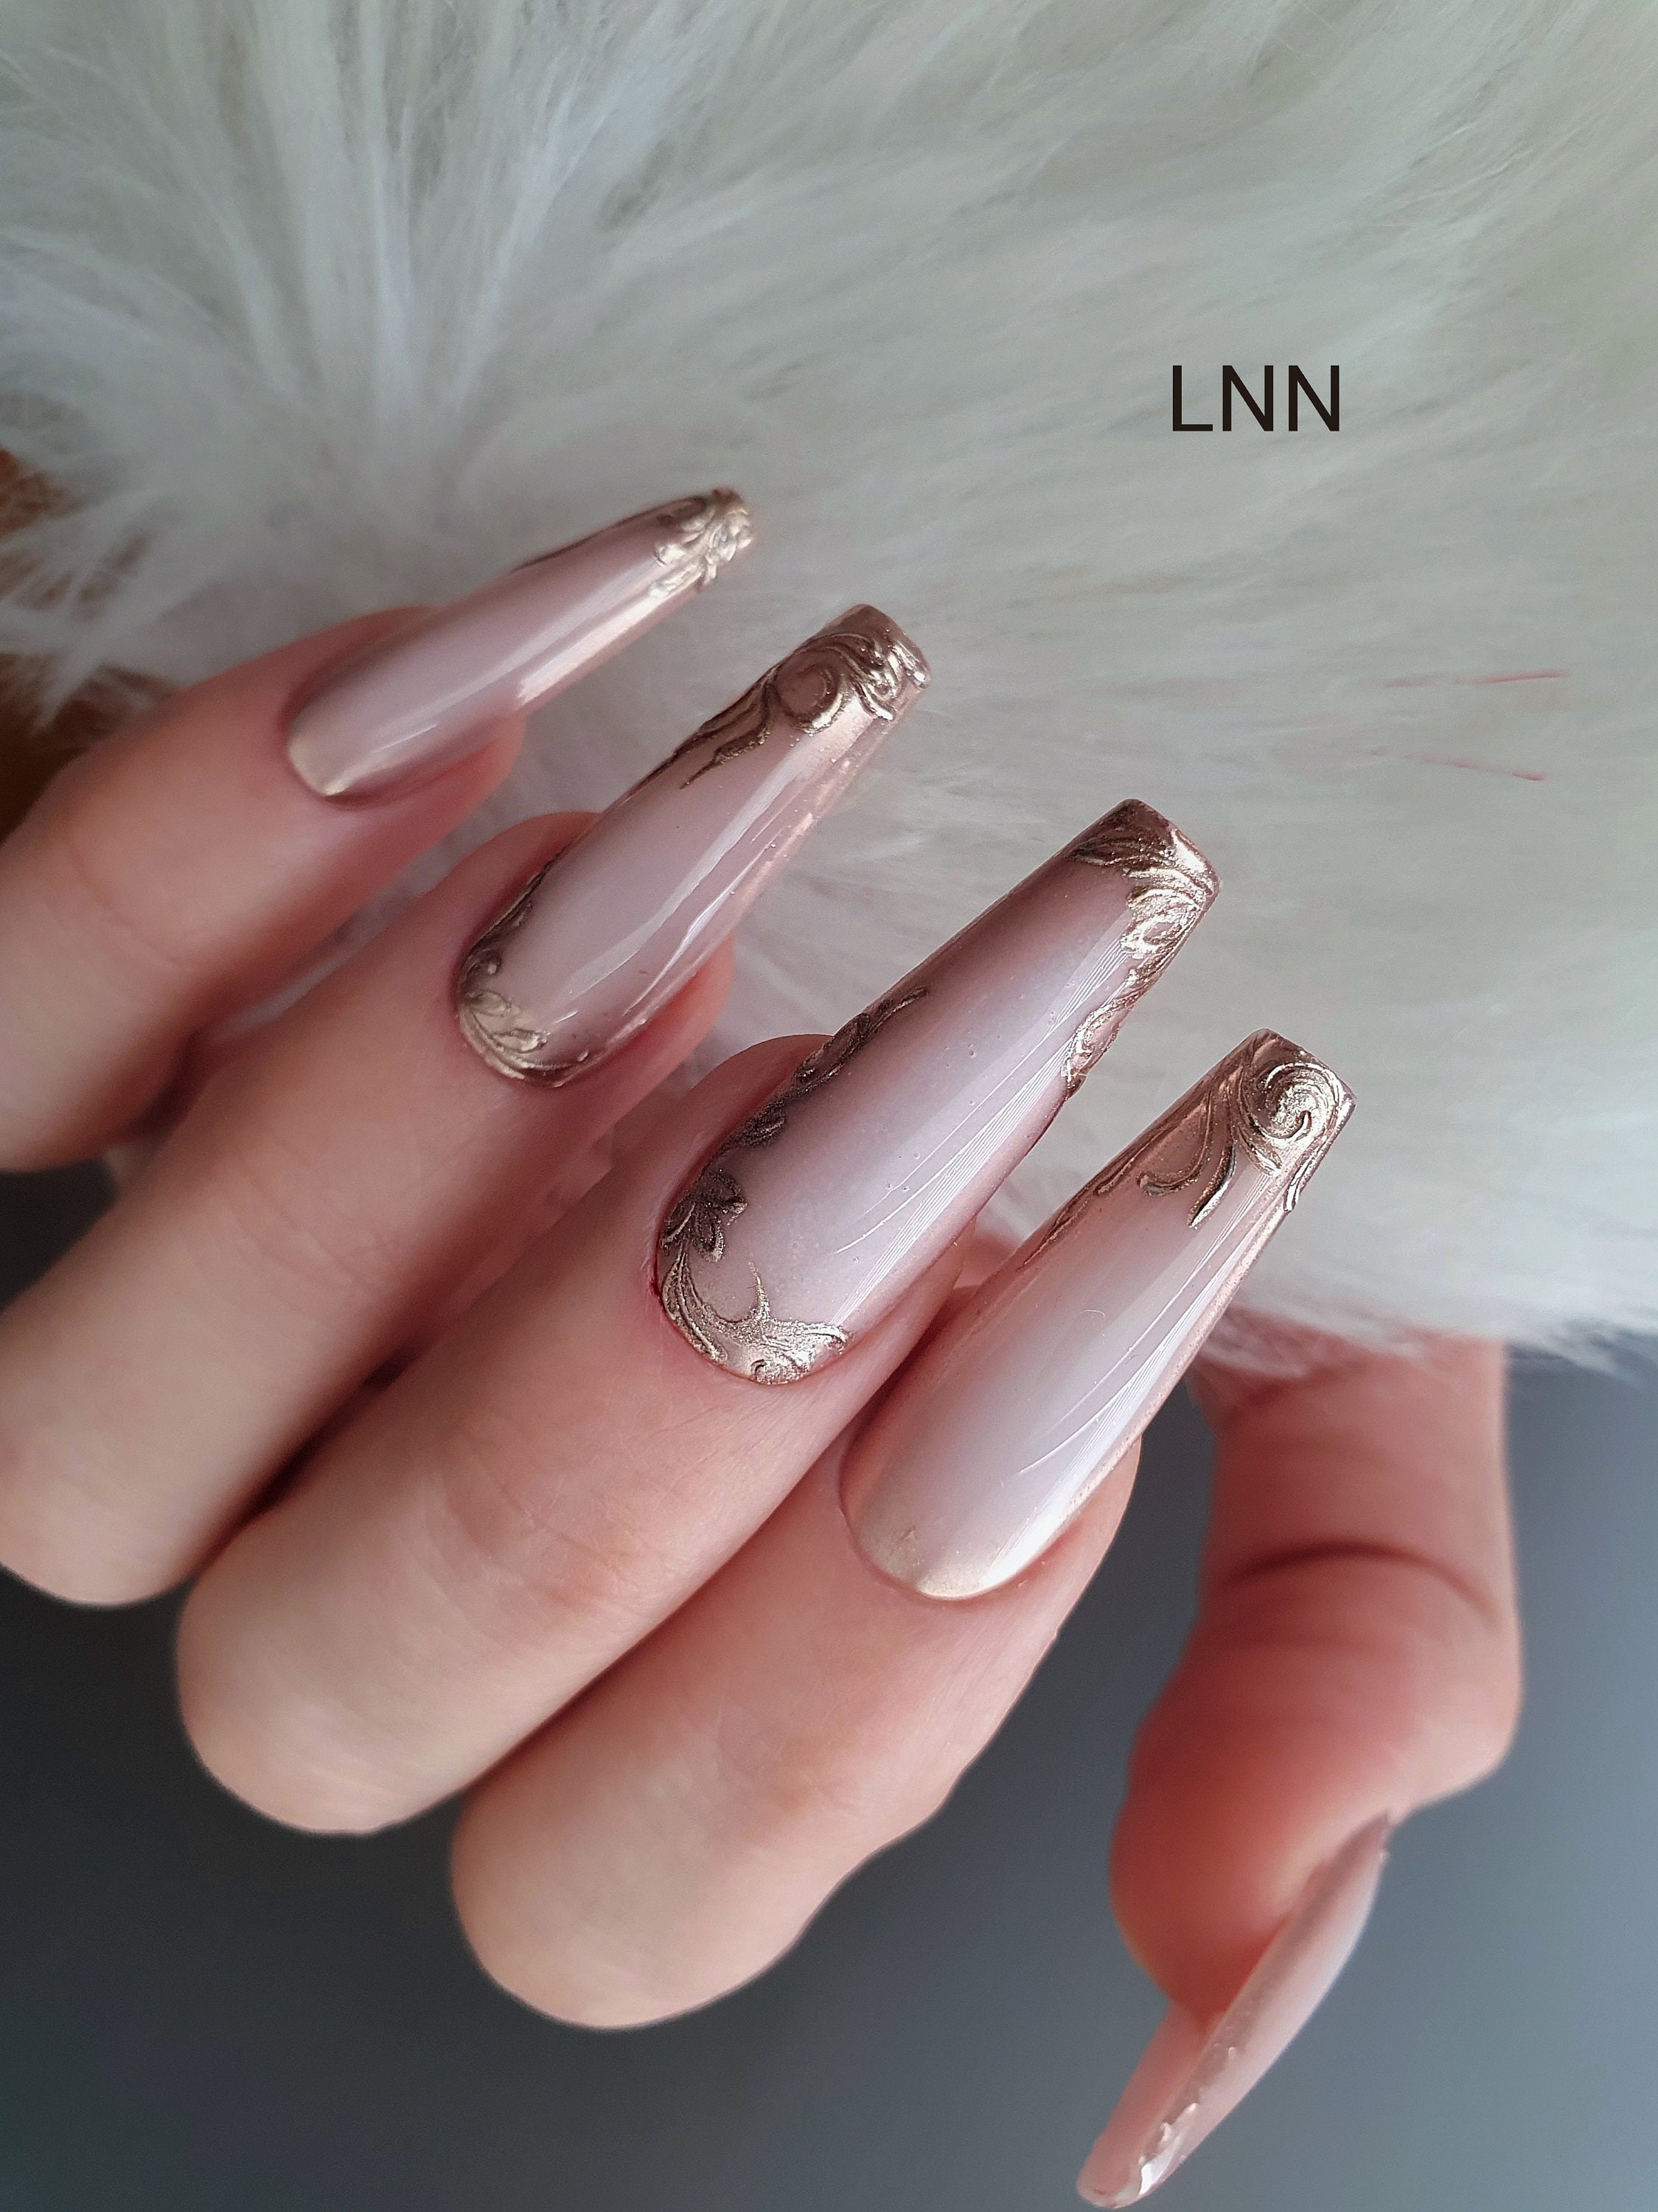 Buy NAILWIND 3 Colors Chrome Nail Powder Set, Reflective Glitter Metallic  Mirror Effect for Nails Art Design 3D Holographic Silver Rose Gold Pigment  Online at Low Prices in India - Amazon.in